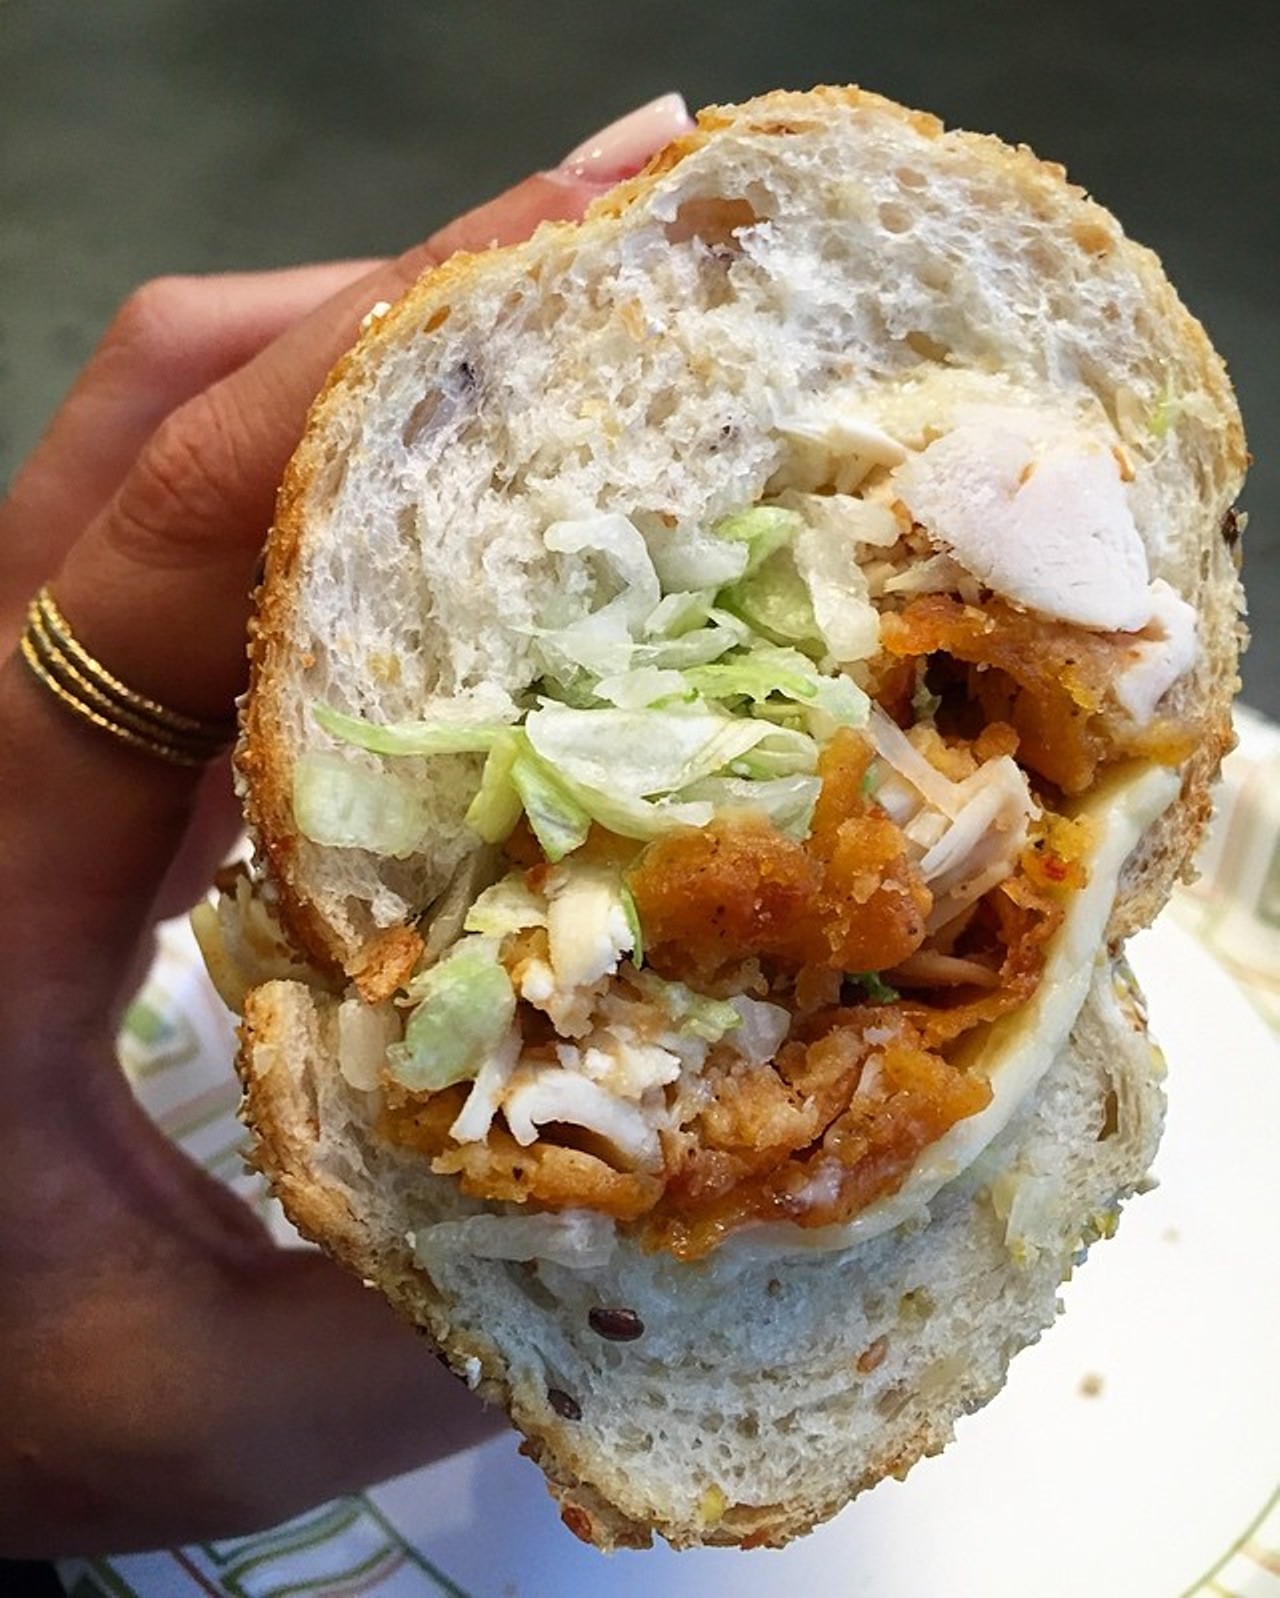 Chicken Tender Publix Sub
Publix locations
Not quite a strictly Orlando dish, but a local favorite regardless. No one can quite put their finger on why a pub sub is so much better than other any other subs, but they just are. Any sub with Boar&#146;s Head deli meat is good, but the chicken tender sub is heavenly.
Photo via donutjudgemydiet/Instagram